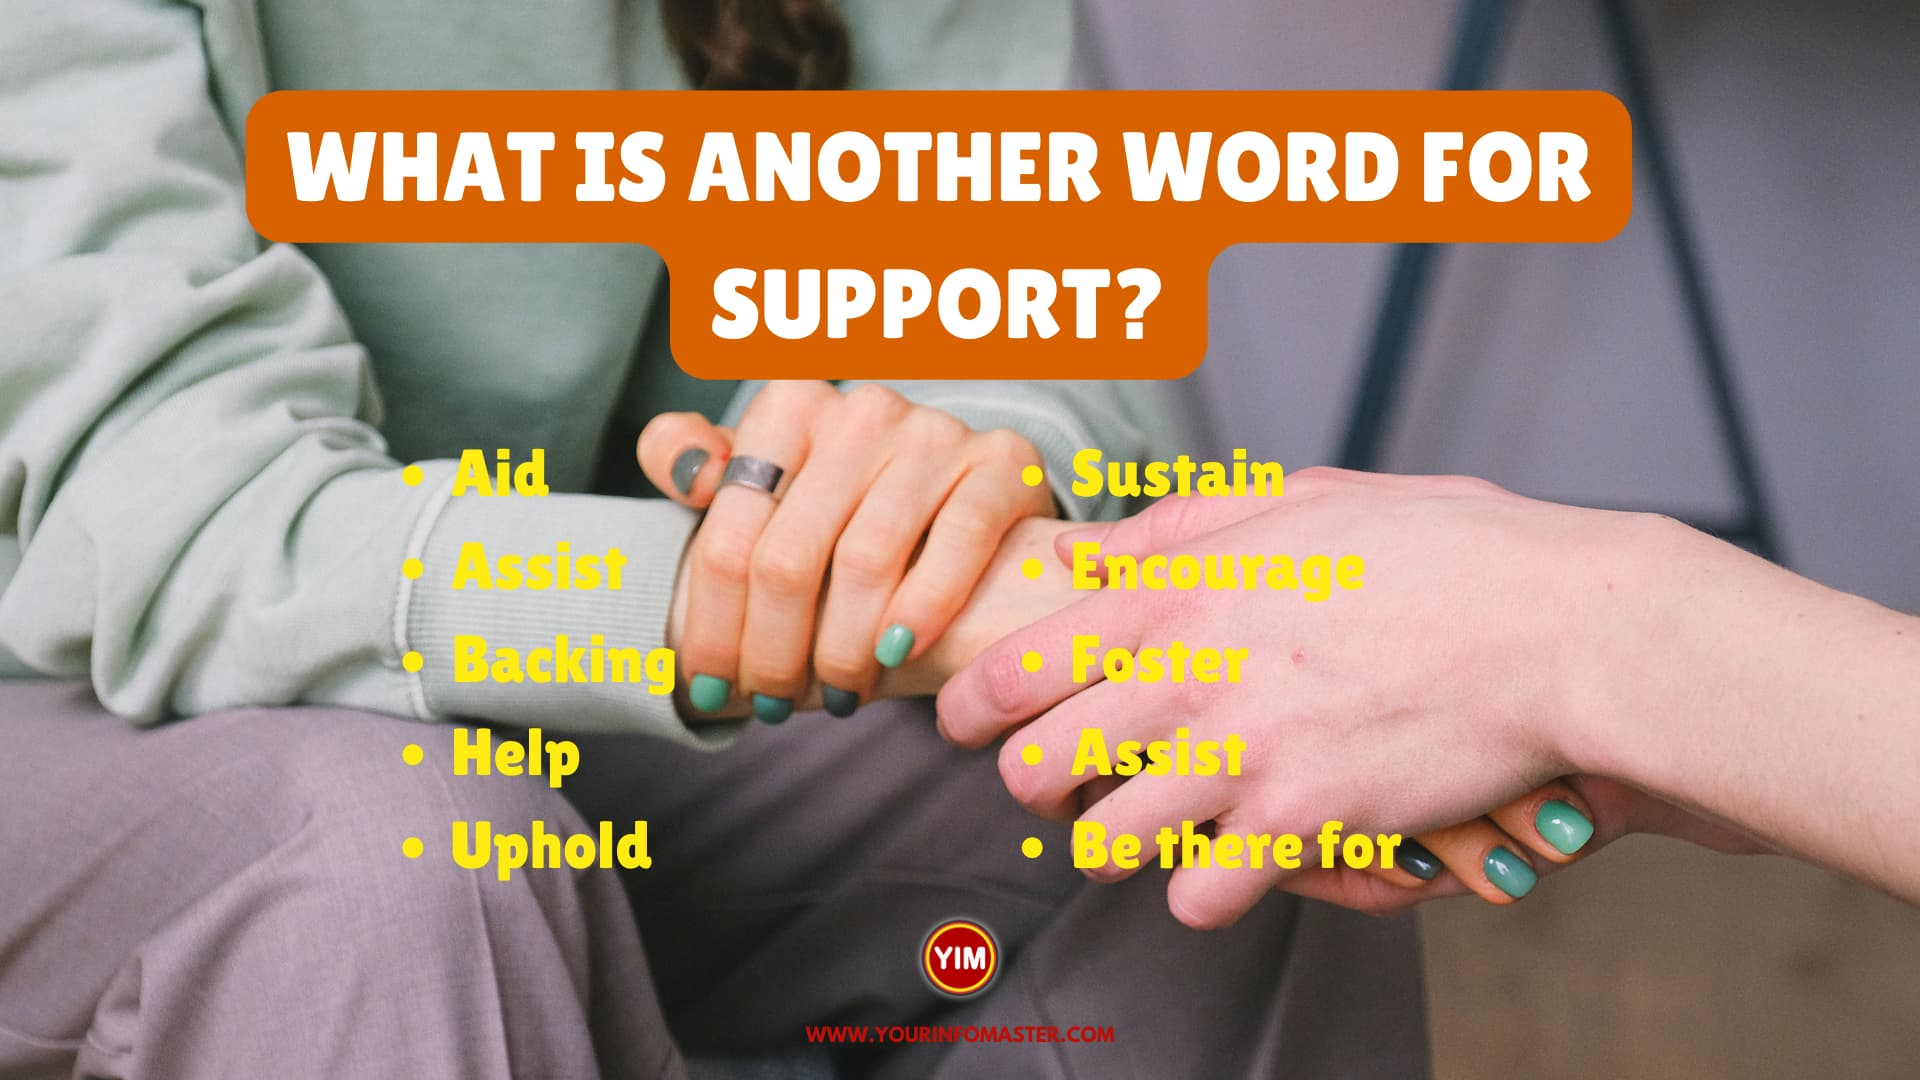 What is another word for Support